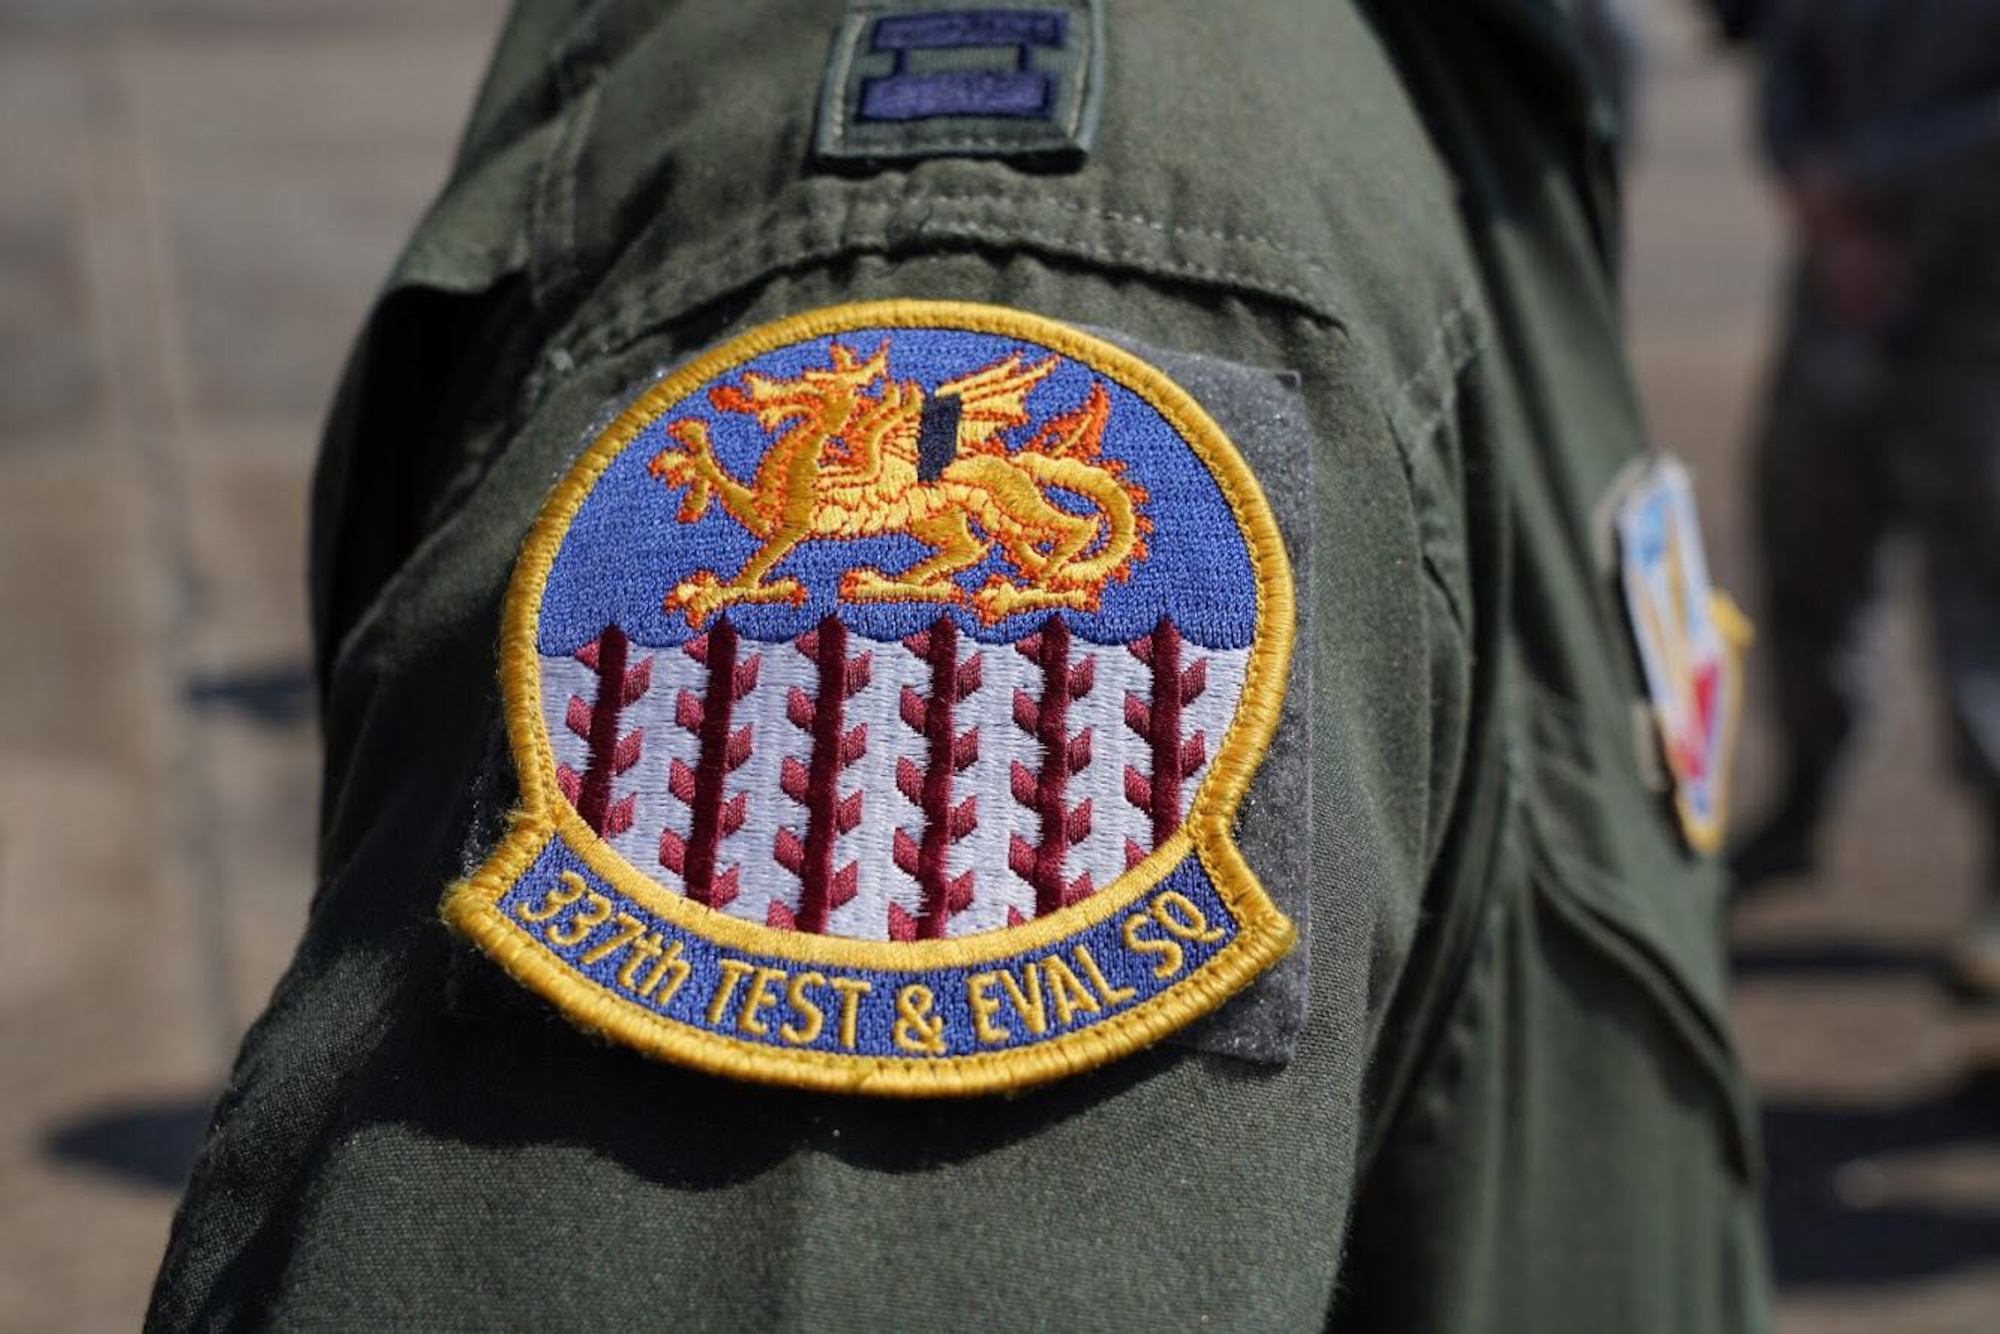 A pilot wears the patch of the 337th Test and Evaluation Squadron from Dyess AFB, Texas, during a tour on July 30, 2016 at Eglin Air Force Base, Fla. Aircrew brought the 53rd Wing bomber to allow wing personnel an opportunity to see one of their geographically separated aircraft up close. (U.S. Army photo/SGT Sean Hall)